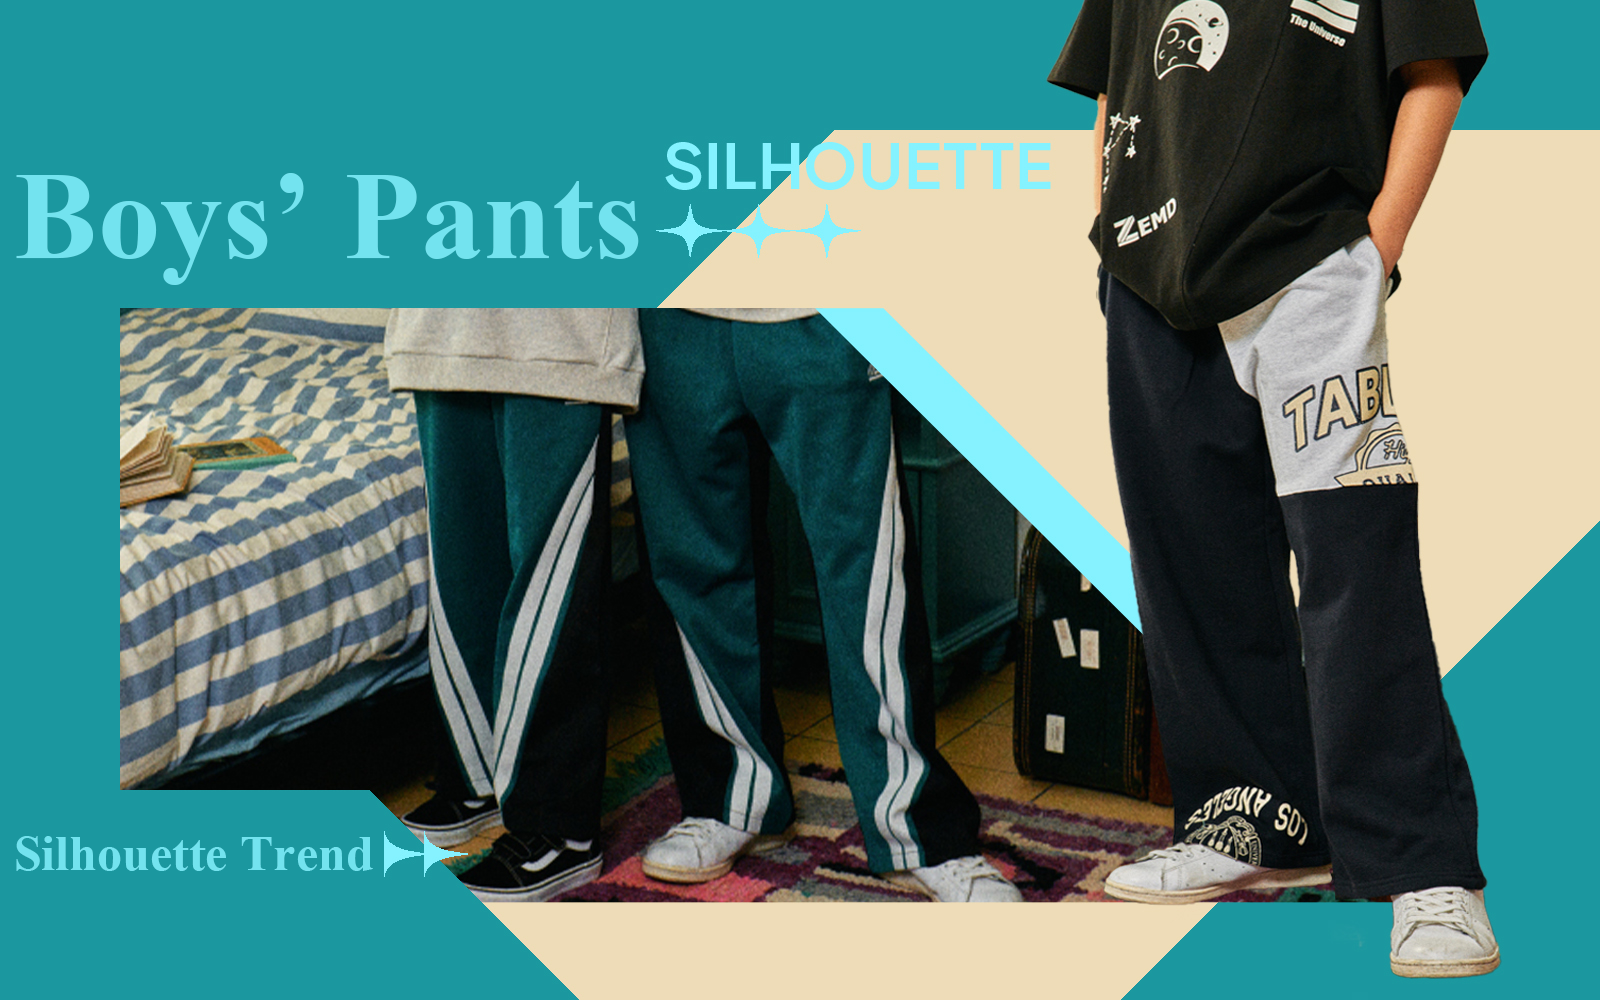 The Silhouette Trend for Boys' Pants